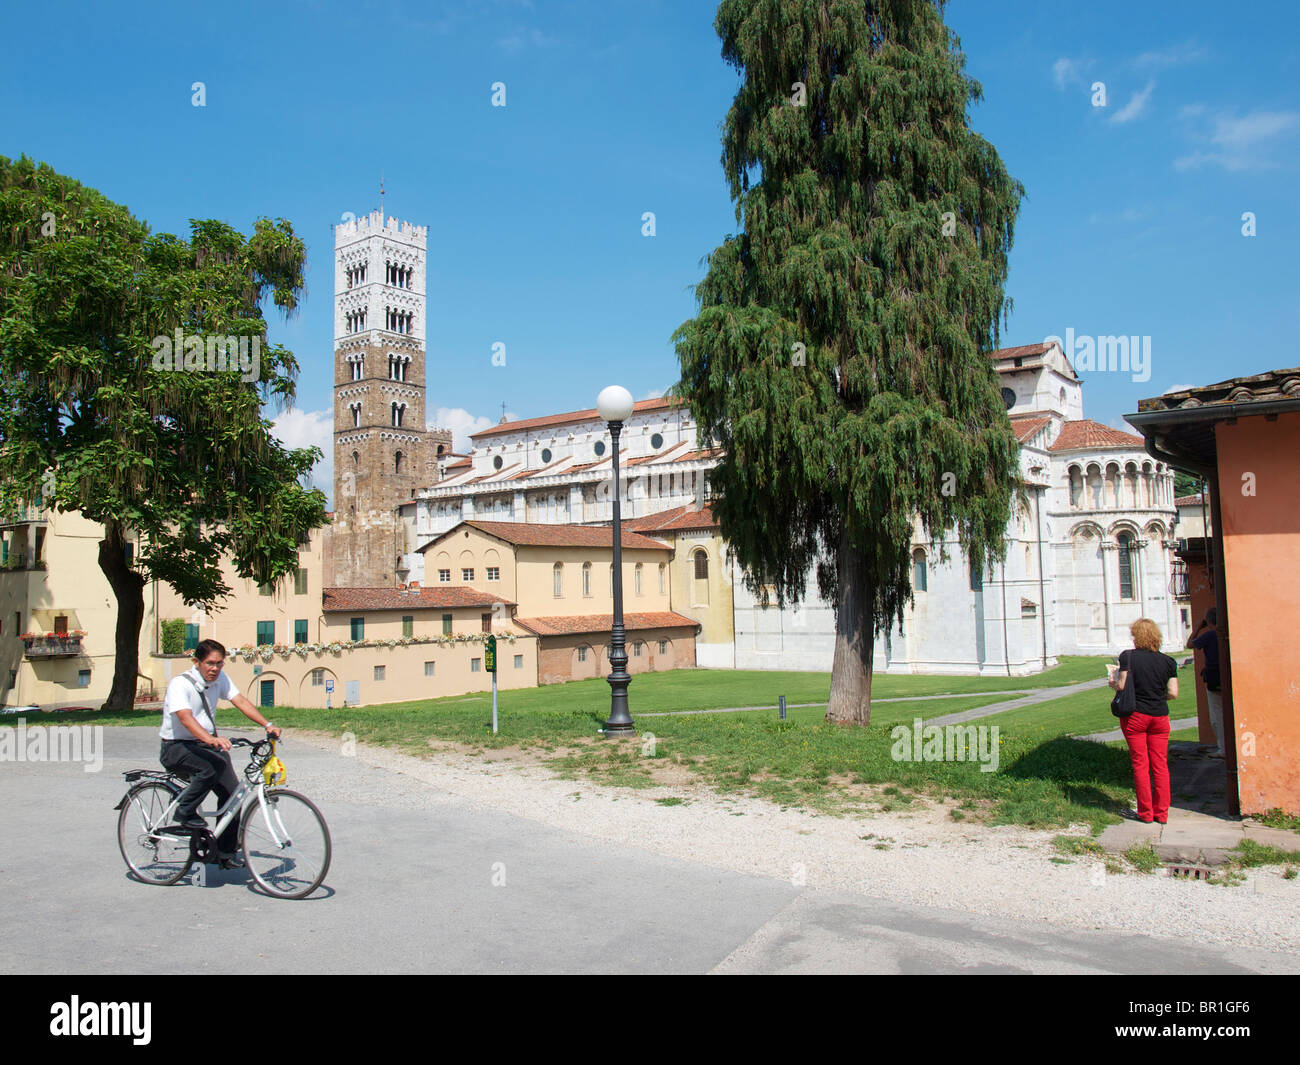 Street scene in the old historic city of Lucca, Tuscany, Italy Stock Photo